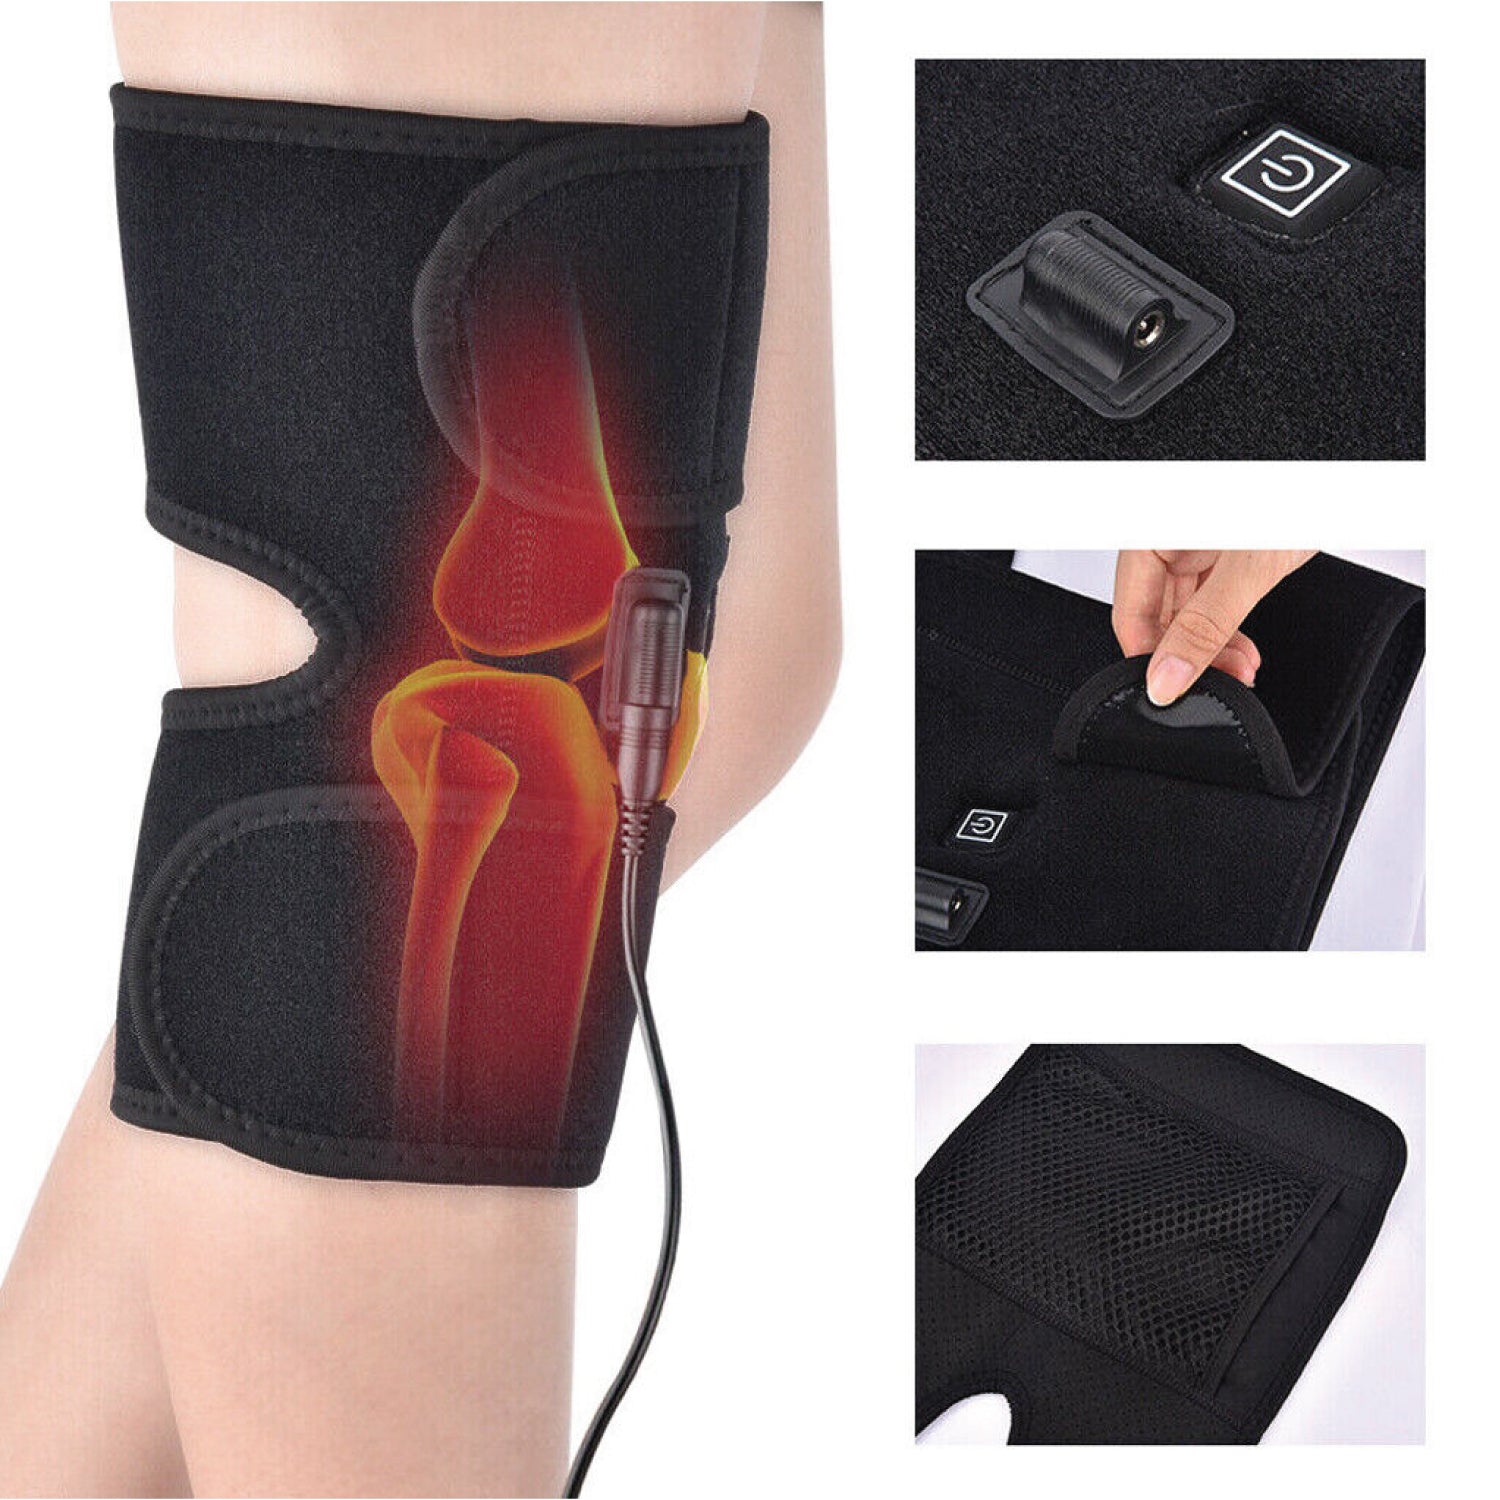 Comfier Heated Knee Brace Wrap with Massage,Vibration Knee Massager with Heating Pad for Knee, Leg Massager